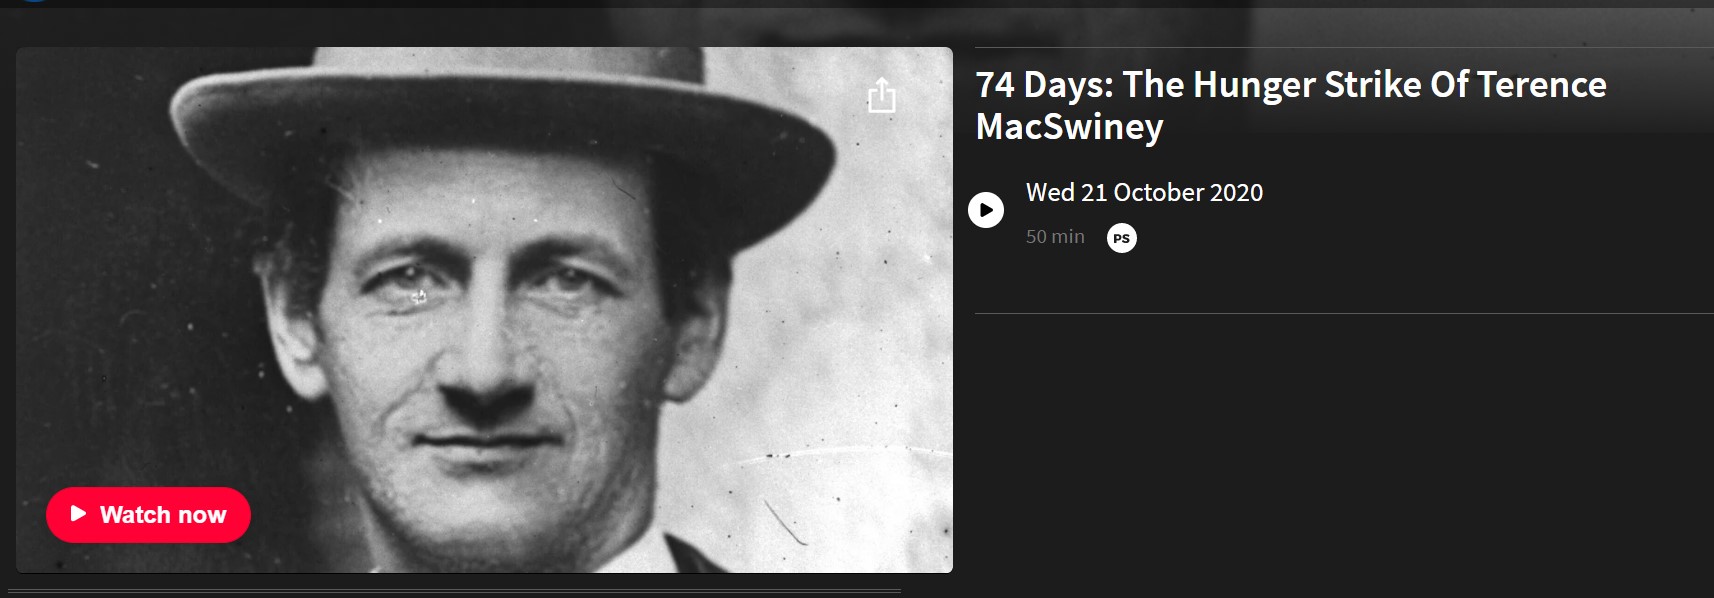 Section 2 - Watch - RTE Doc - Terence MacSwiney